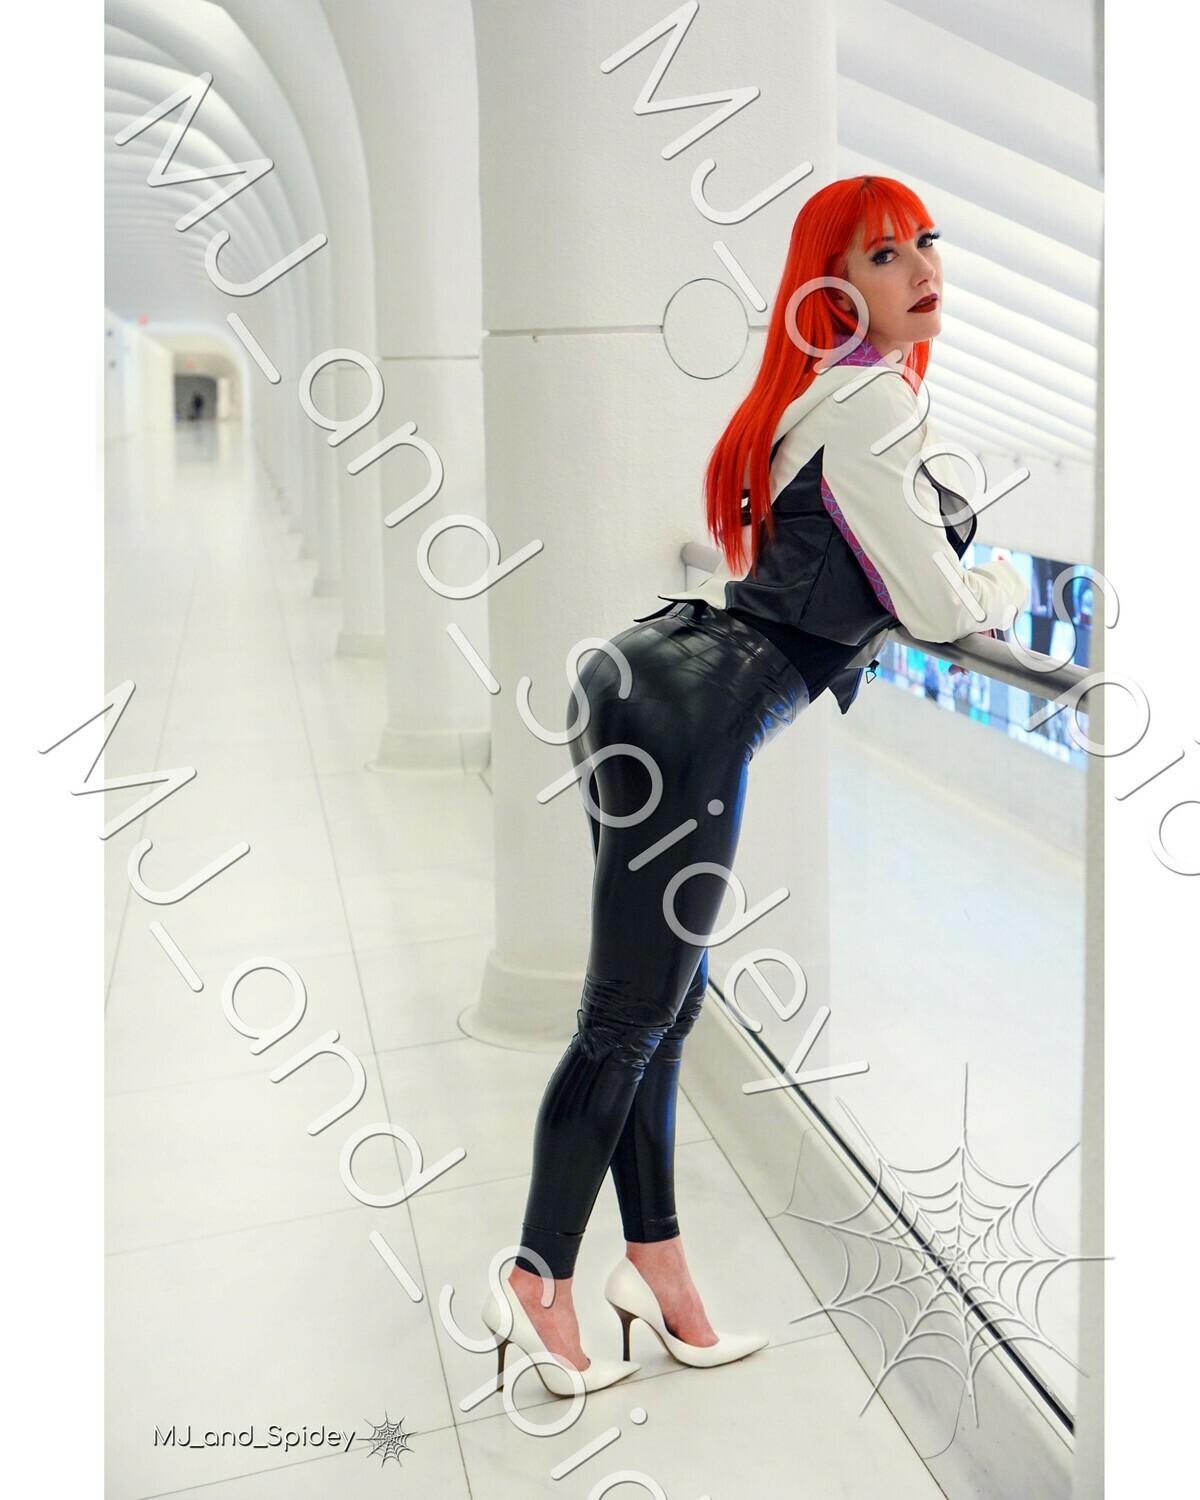 Marvel - Spider-Man - Mary Jane Watson - Classic 9 -  Cosplay Print (@MJ_and_Spidey, MJ and Spidey, Comics)